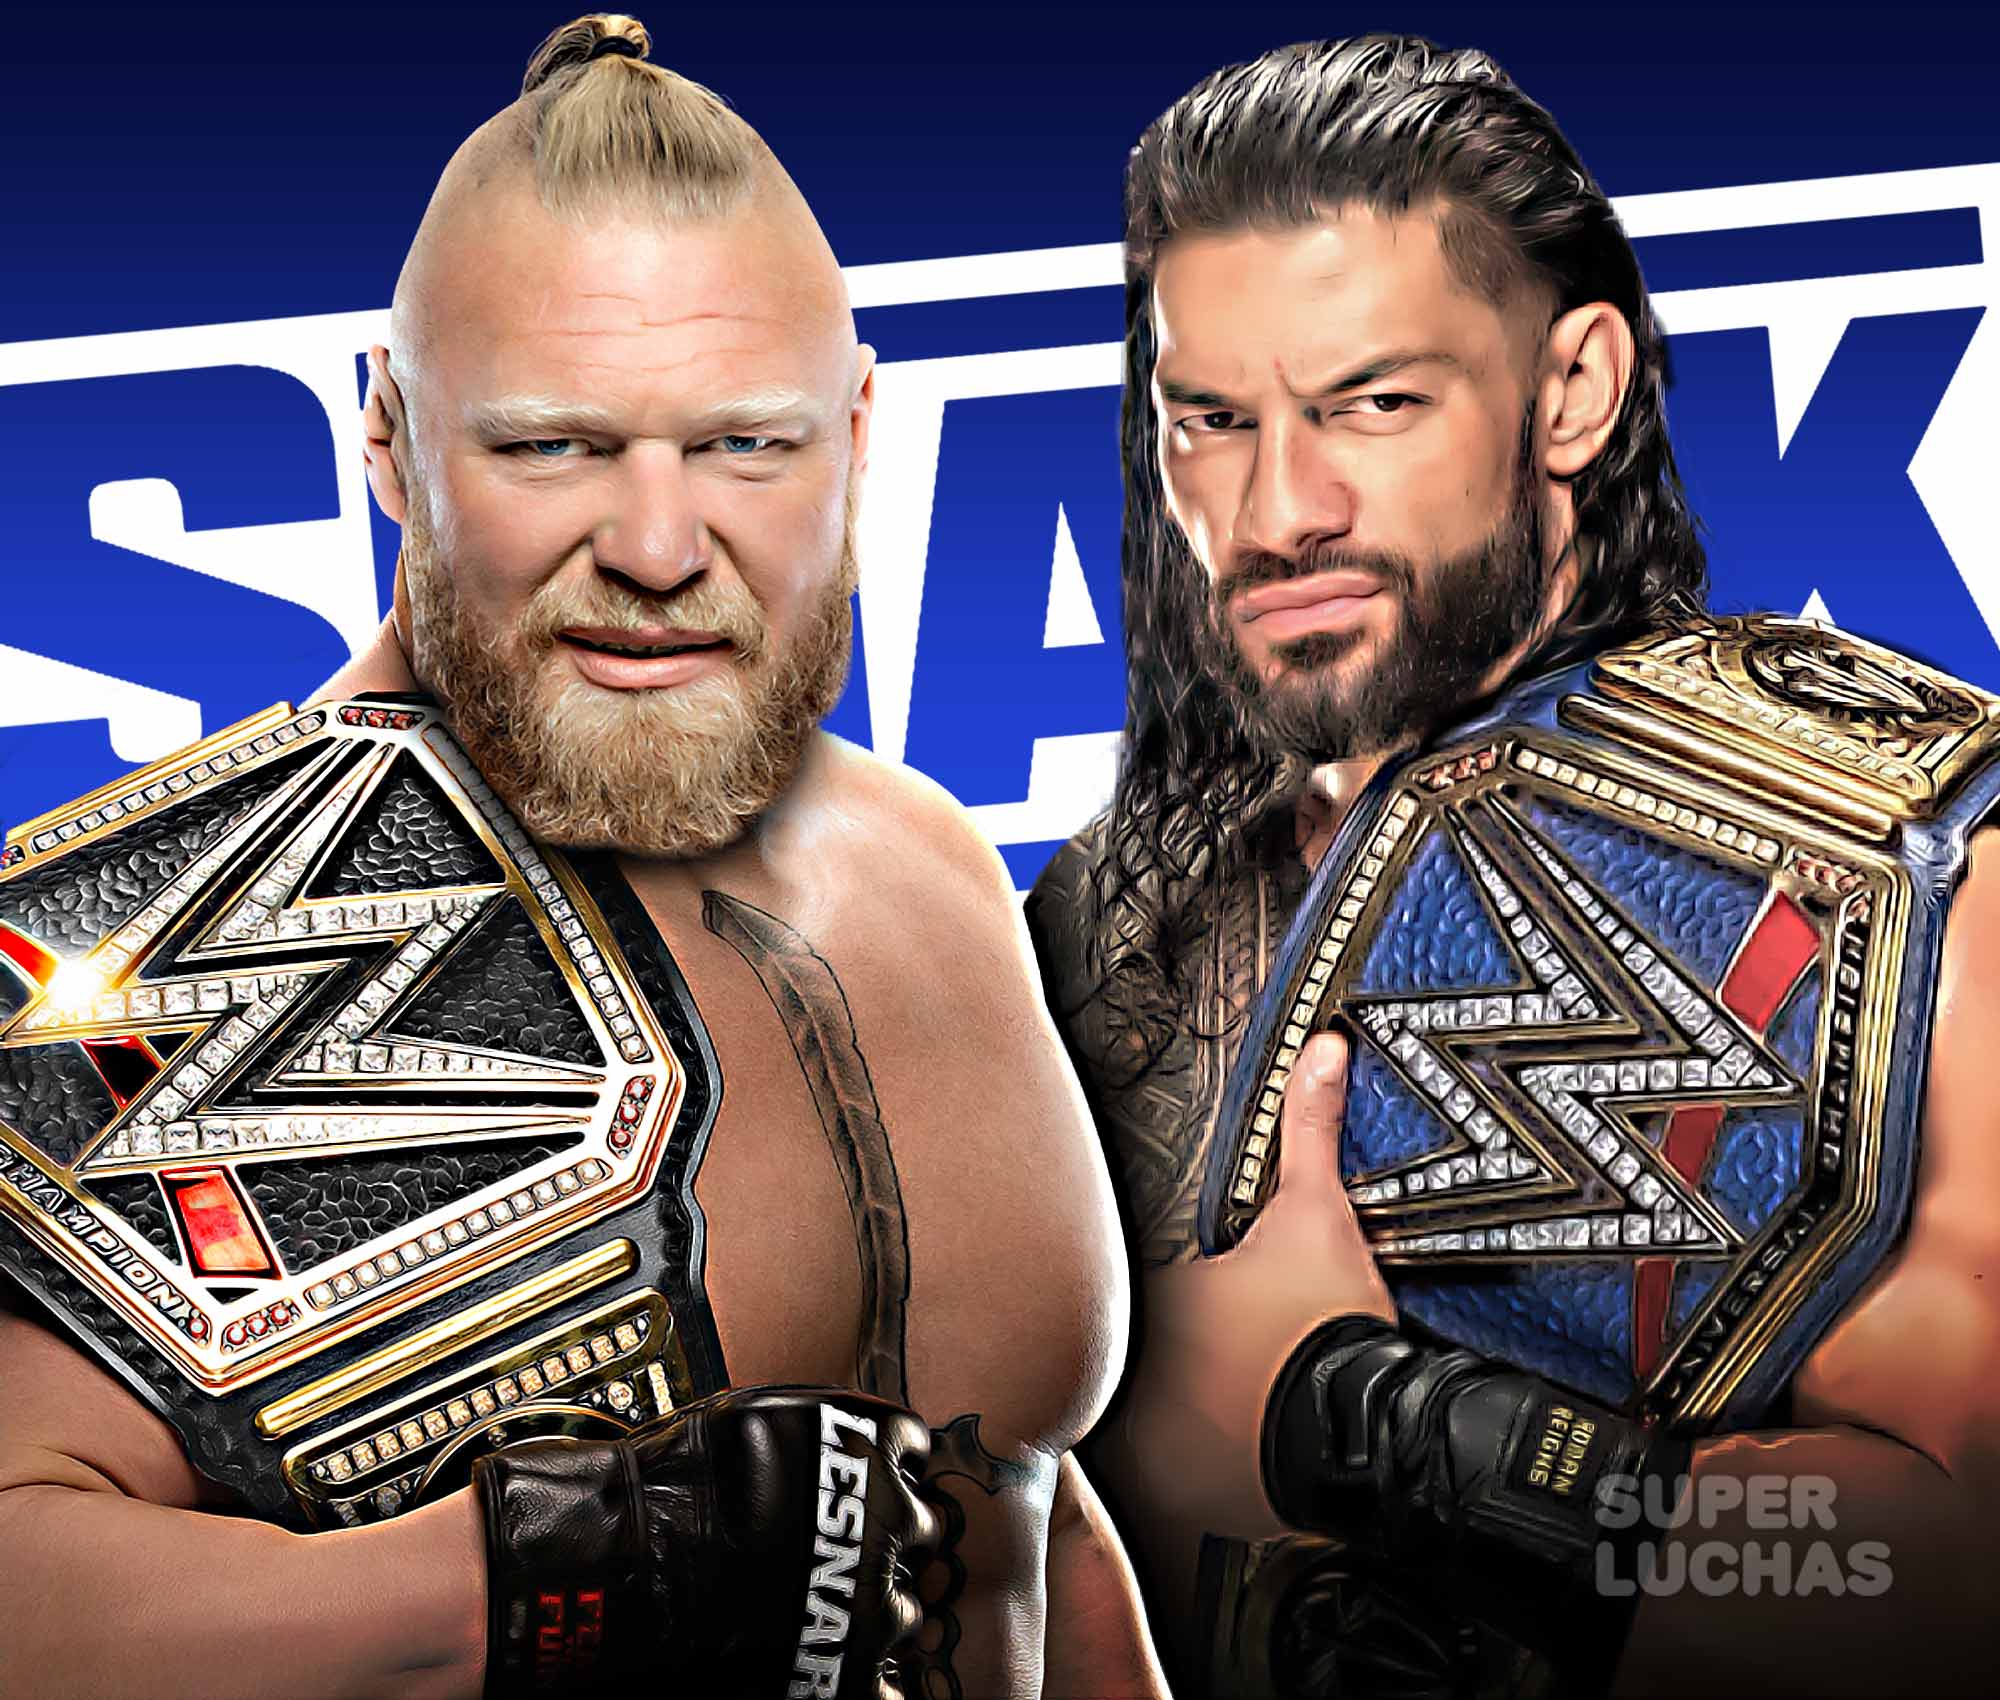 WWE SMACKDOWN March 18 2022 Live results Lesnar